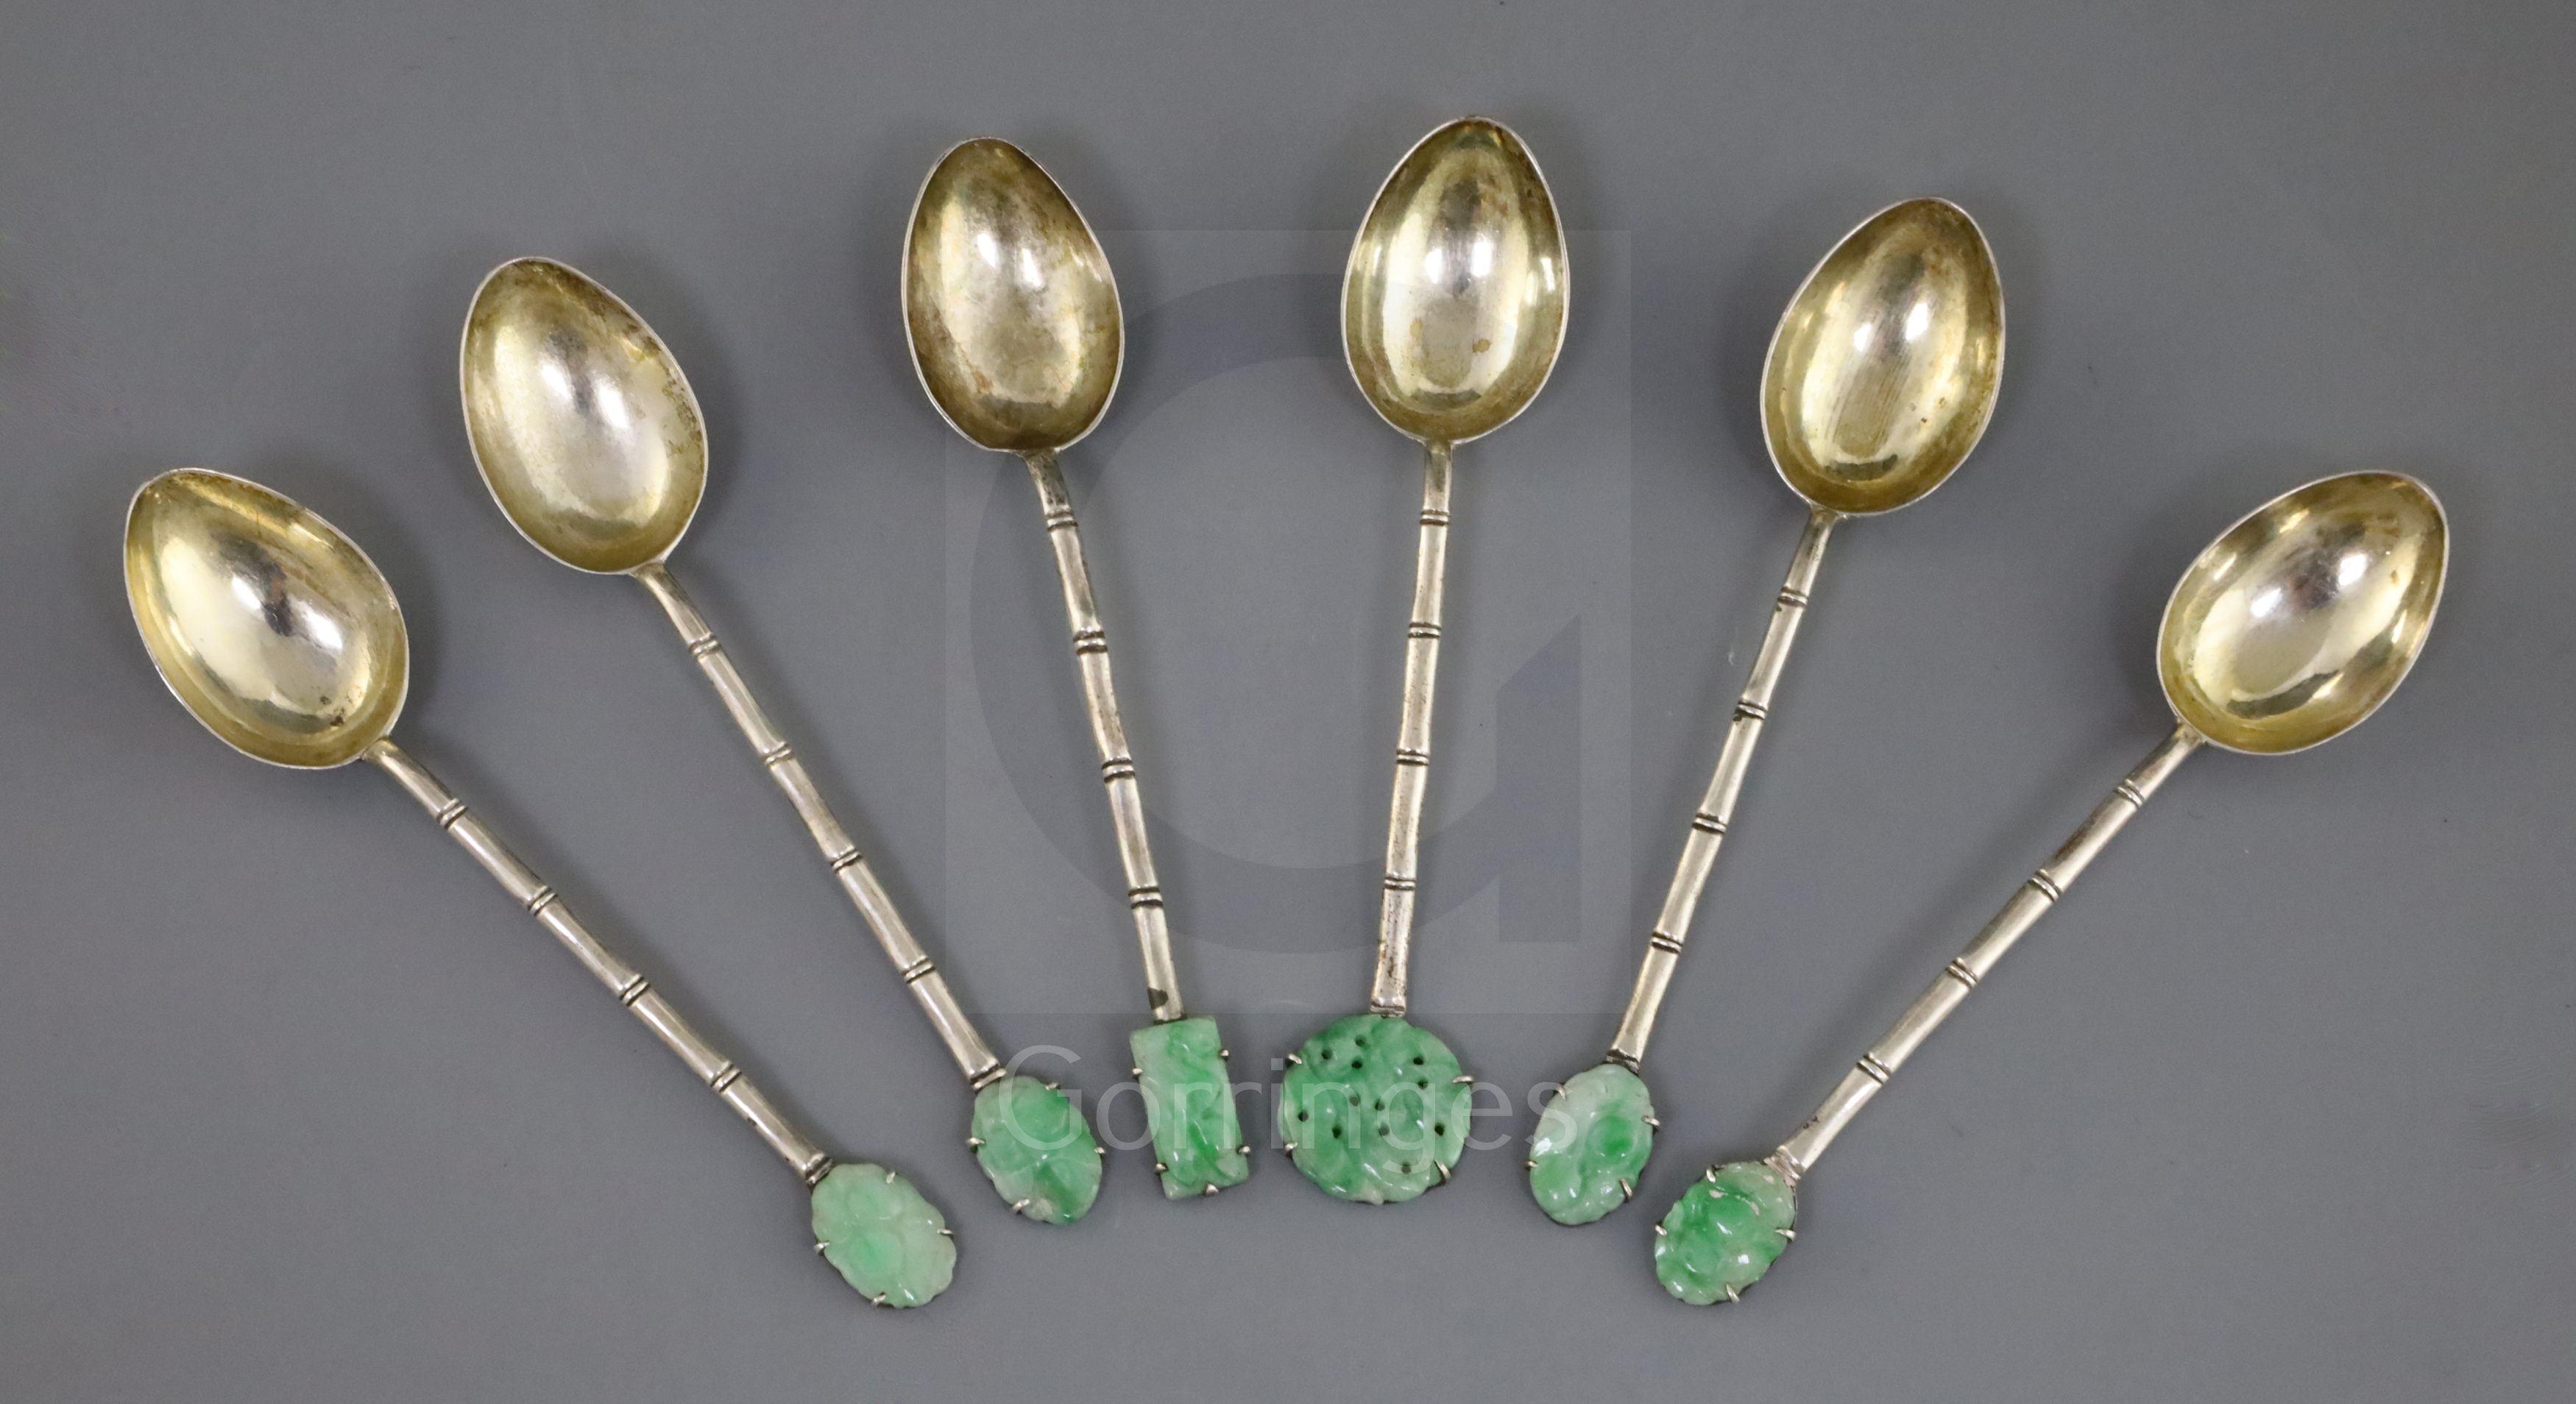 Six Chinese export silver and jadeite mounted teaspoons, early 20th century, the terminals mounted